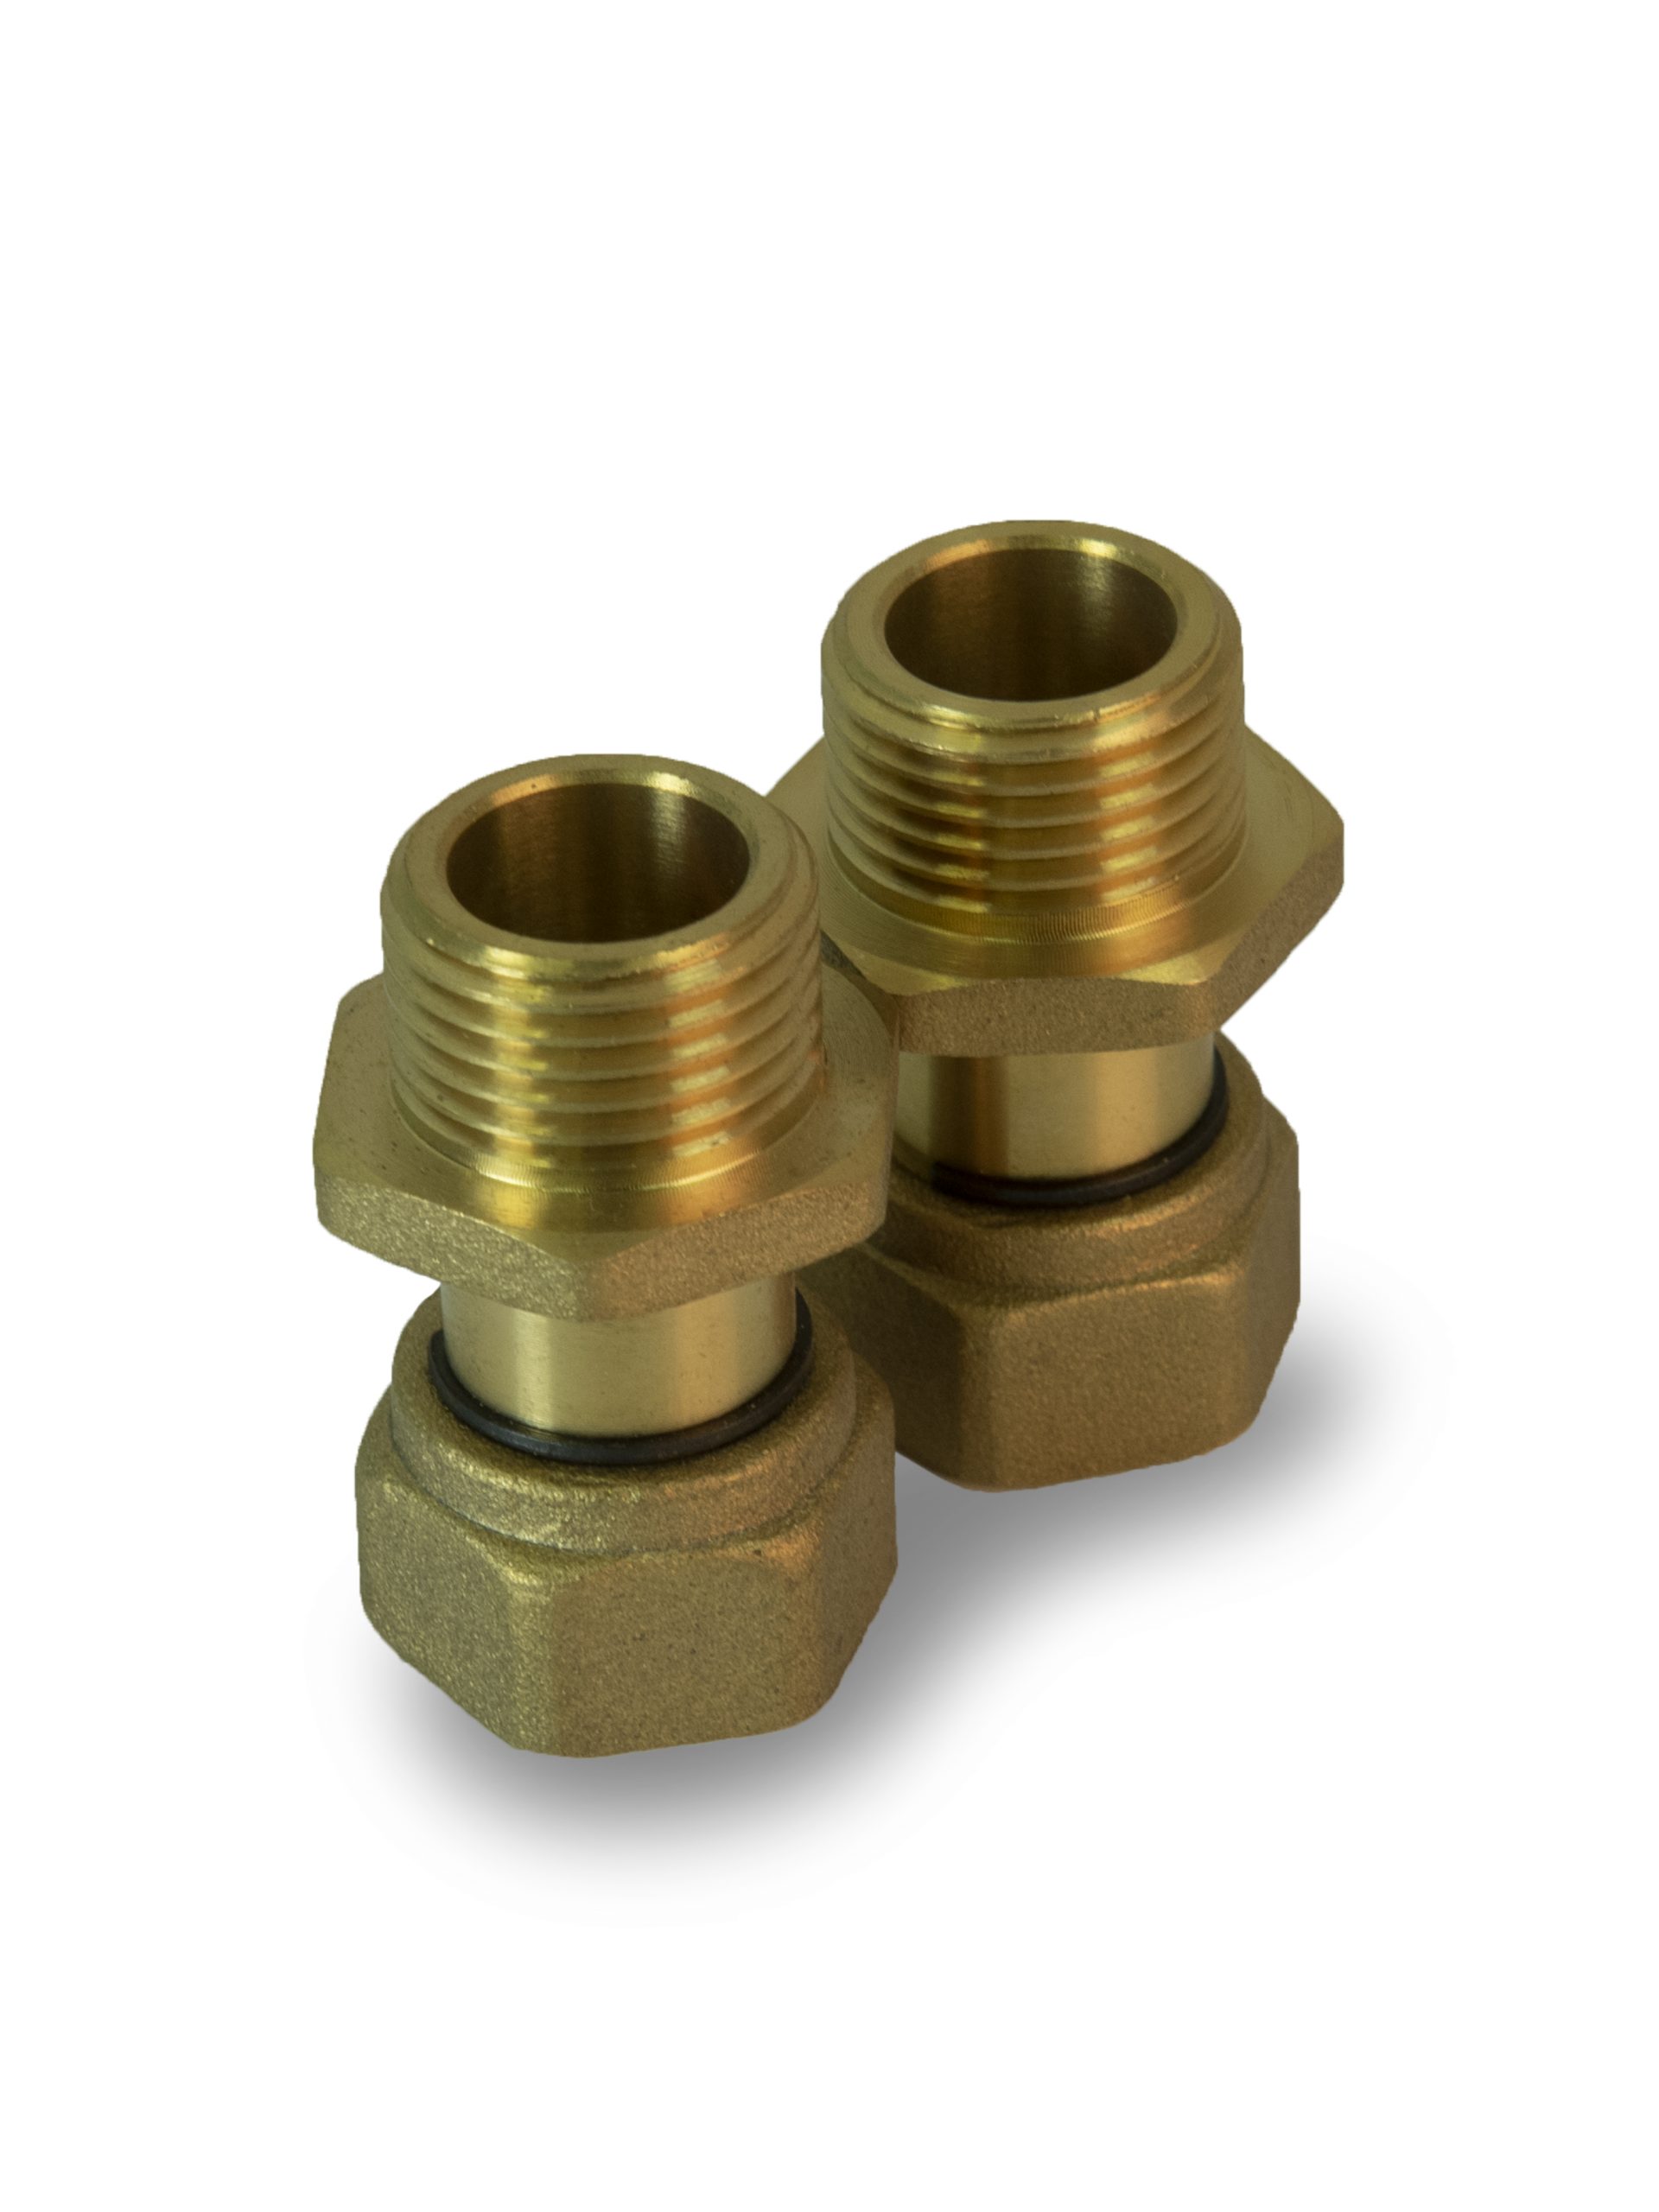 BRASS CONNECTOR MALE 1/2 Inches AND NUT 20X150 (12MM) FEMALE from Gas Equipment Company Llc Abu Dhabi, UNITED ARAB EMIRATES